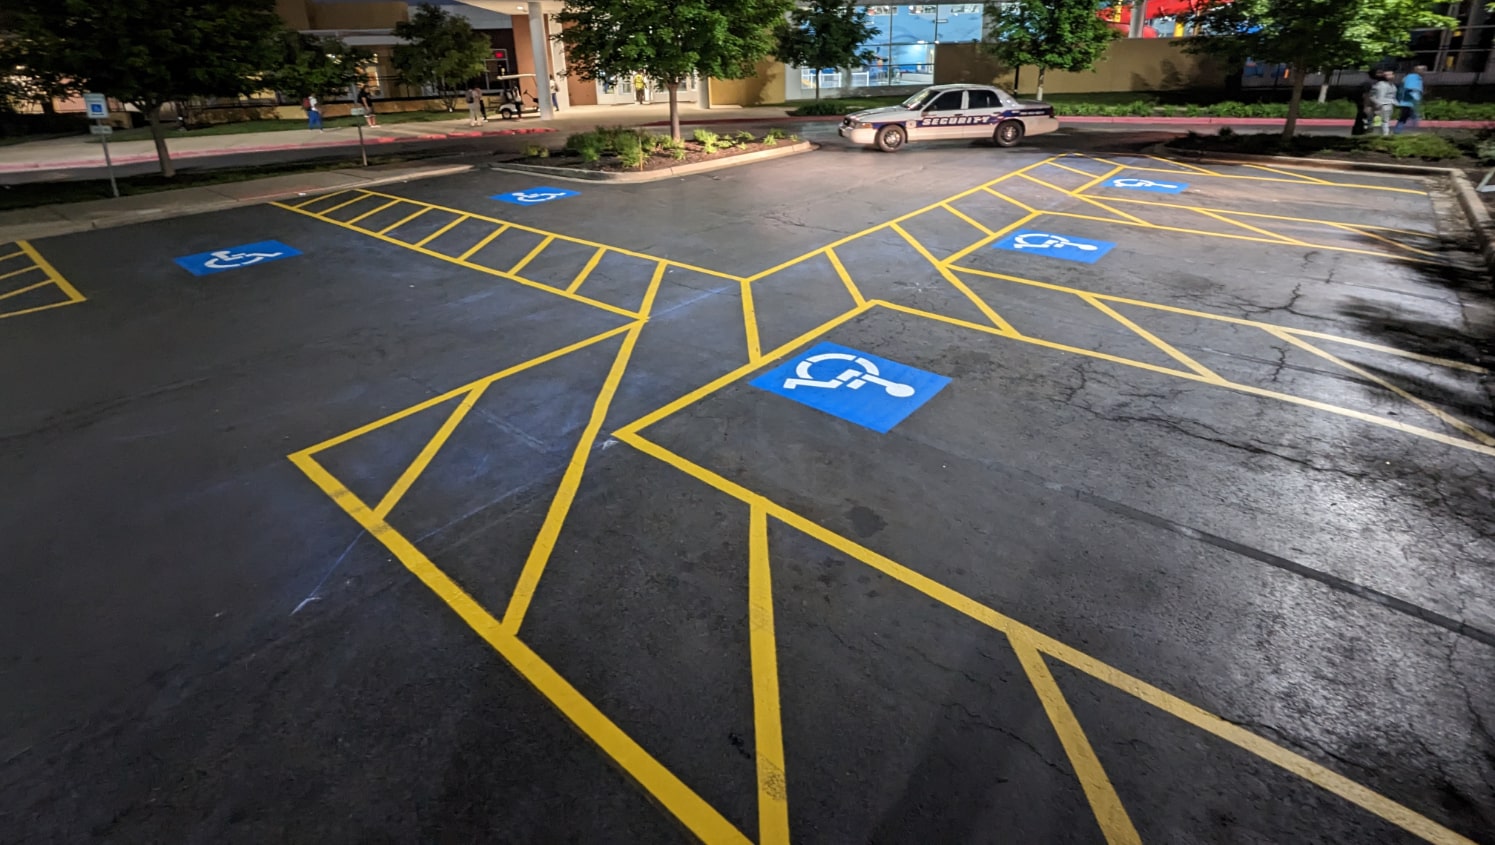 nighttime view of freshly marked ADA-compliant parking stalls and walkways